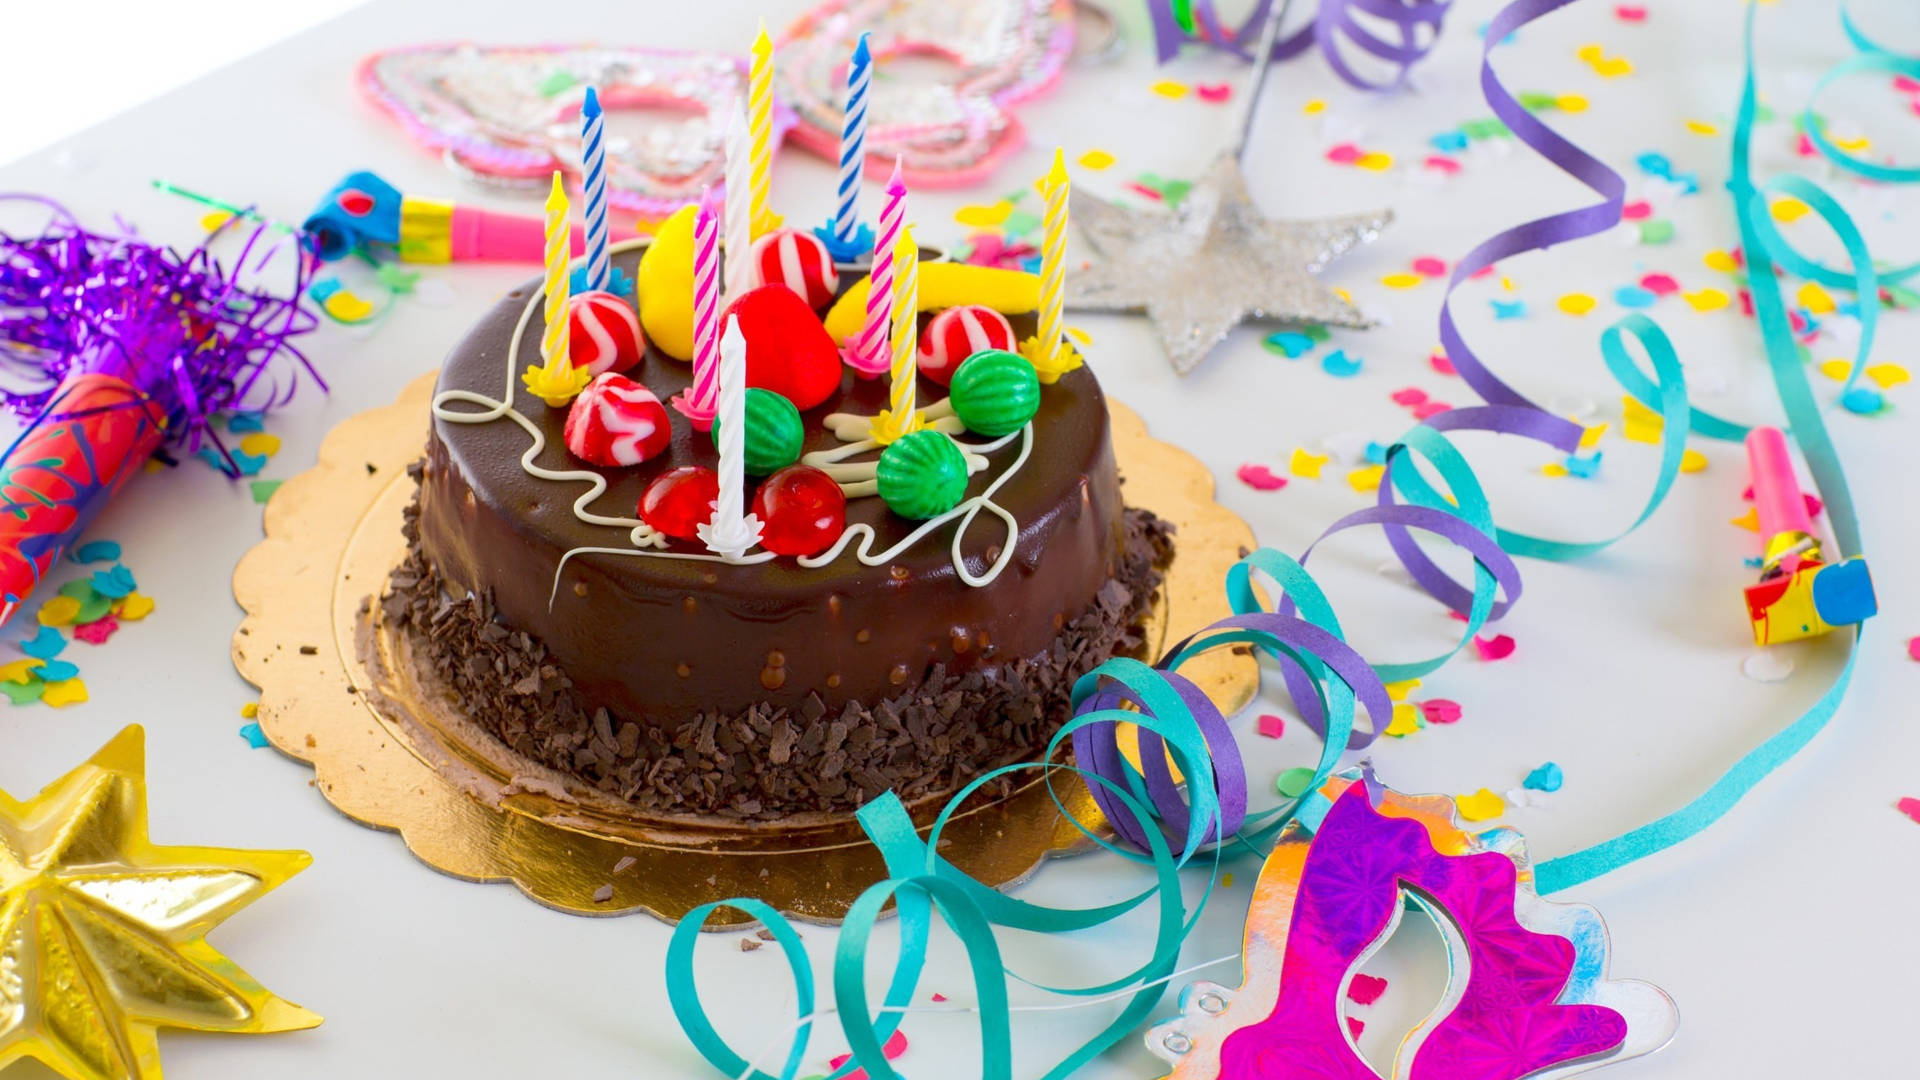 A vibrant and colorful birthday cake with lit candles Wallpaper